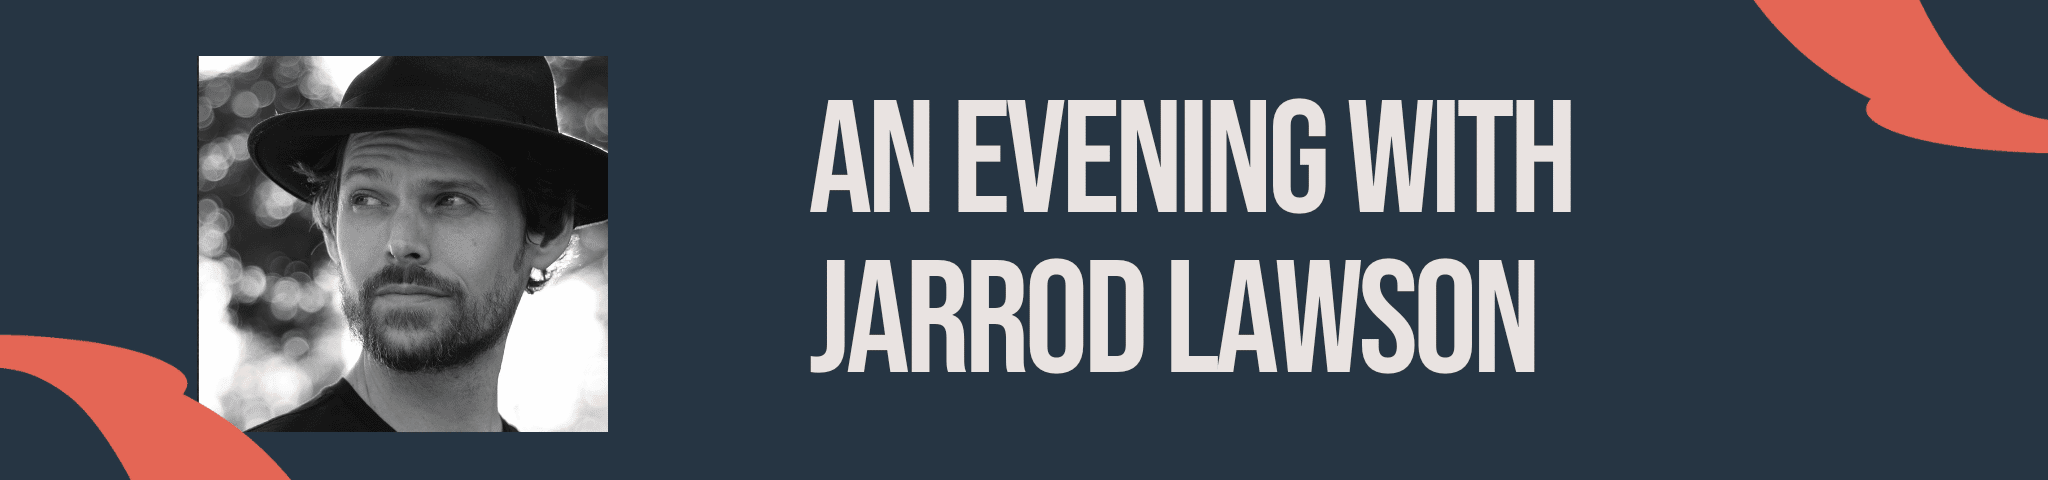 JARROD LAWSON UP CLOSE & PERSONAL – SOLD OUT